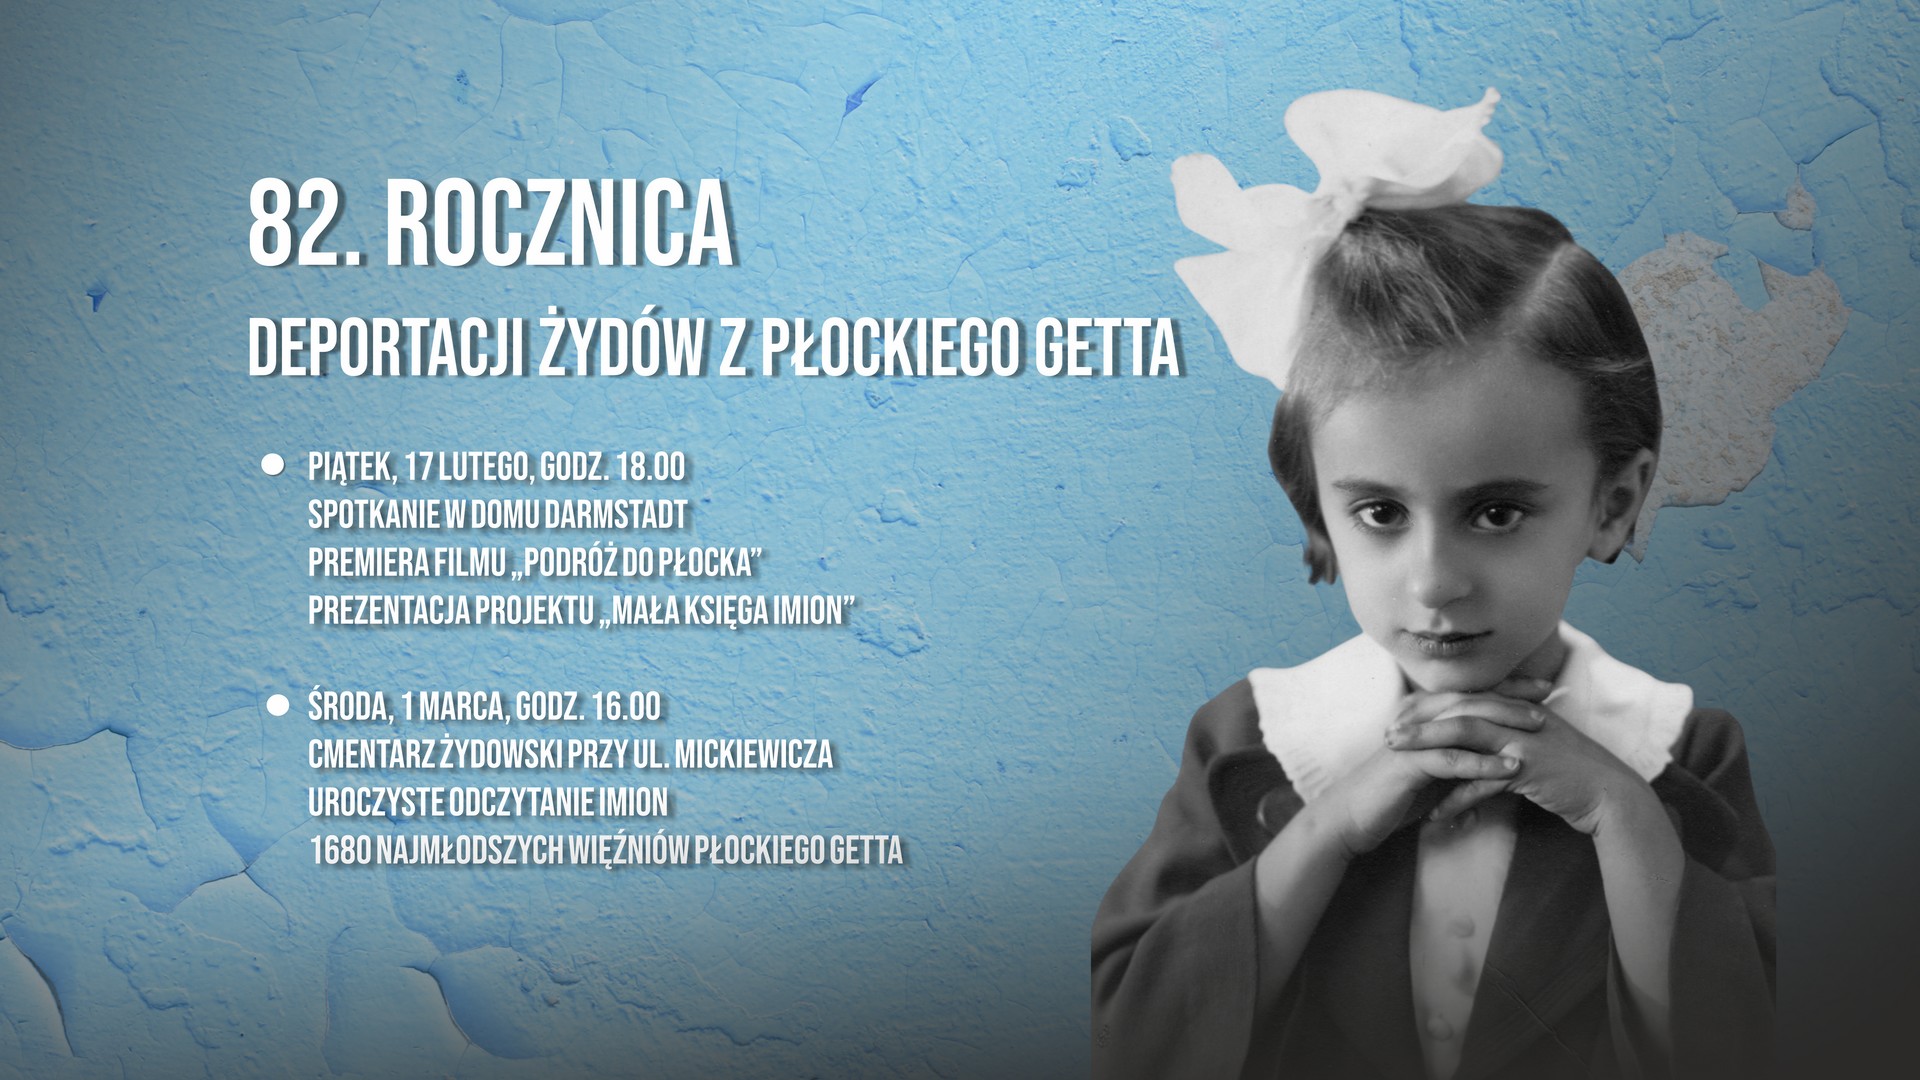 82nd anniversary of the deportation of Jews from the ghetto in Płock